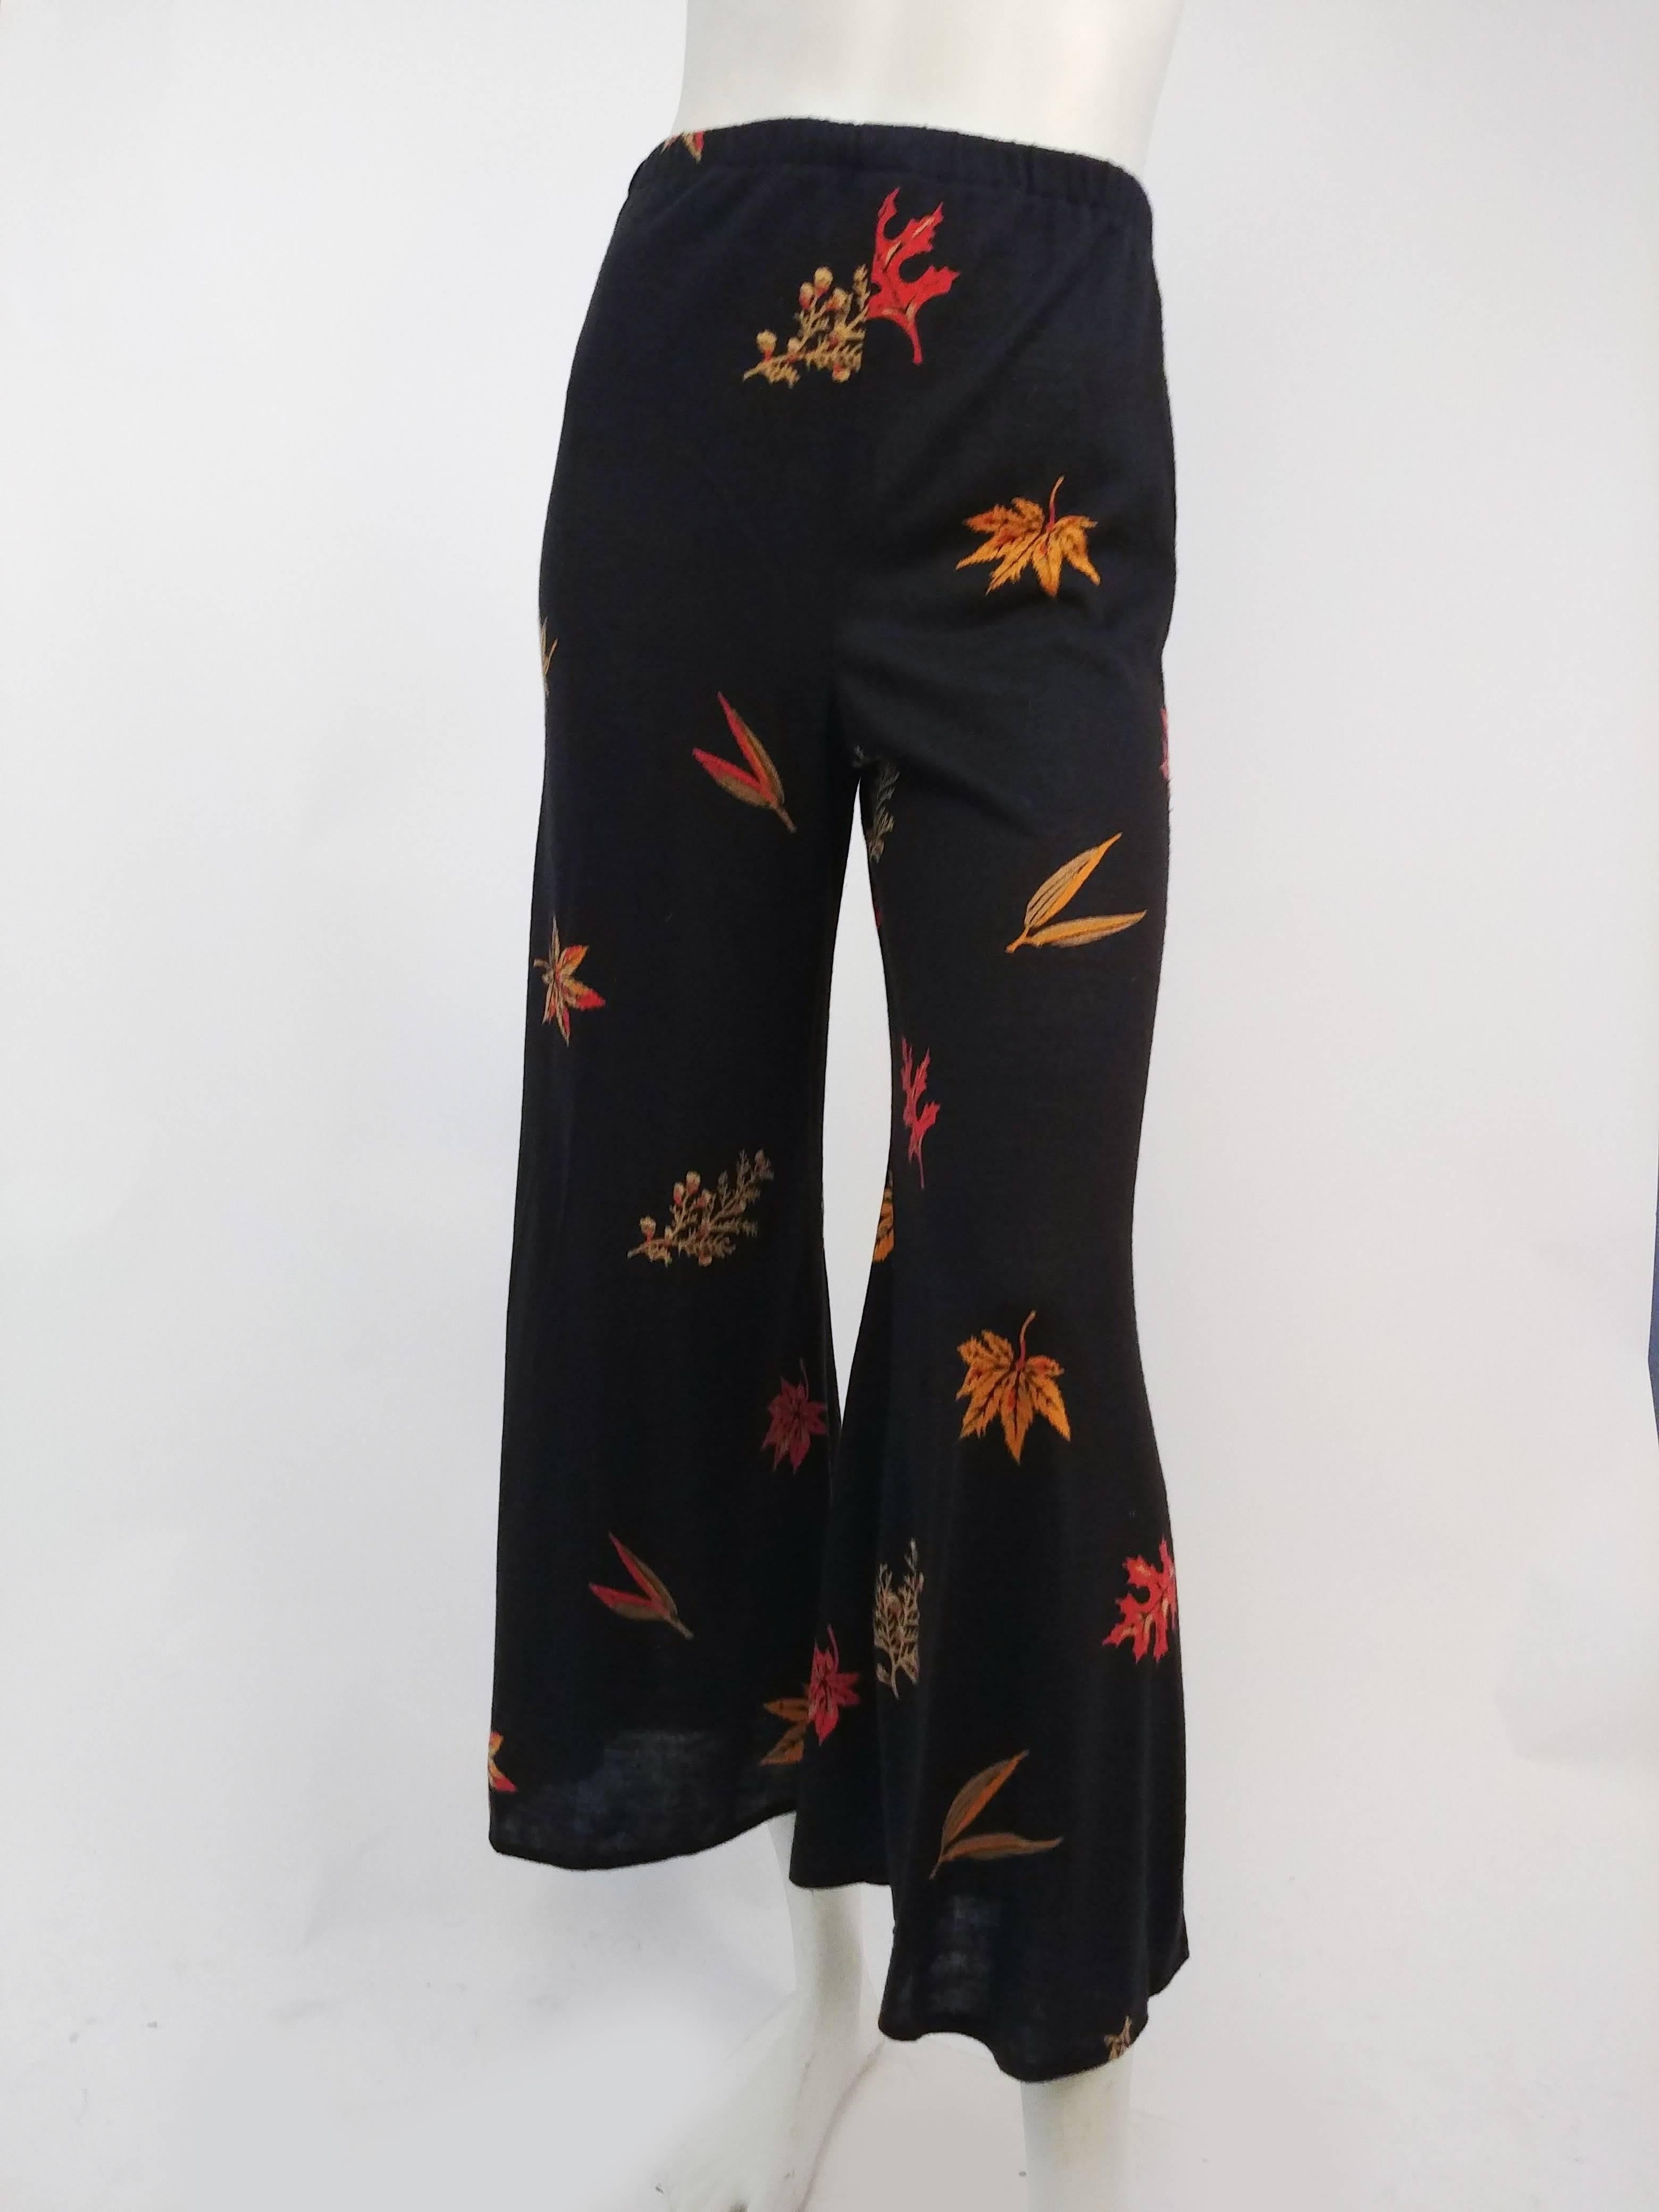 1970s Knit Two Piece Top & Pant w/ Printed Maple Leaves In Good Condition For Sale In San Francisco, CA